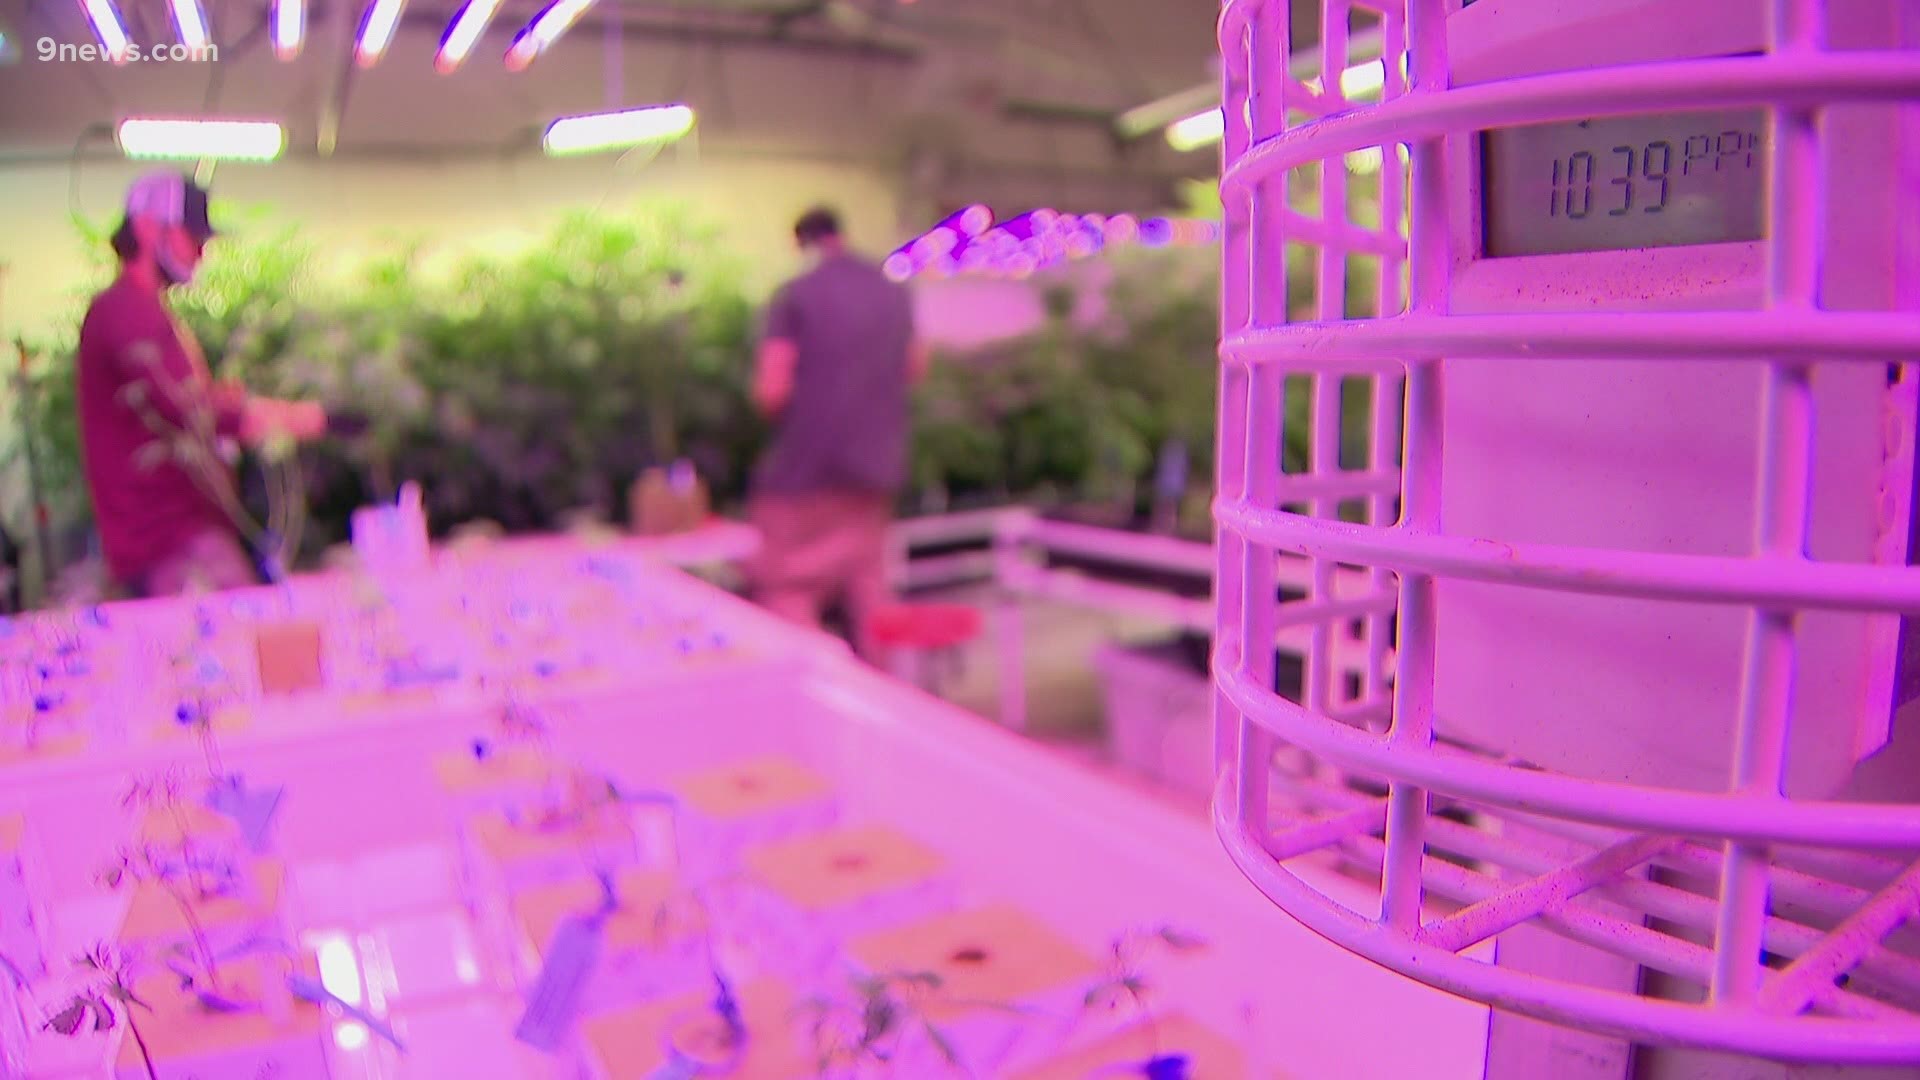 This could have a big impact on the marijuana industry in Denver.